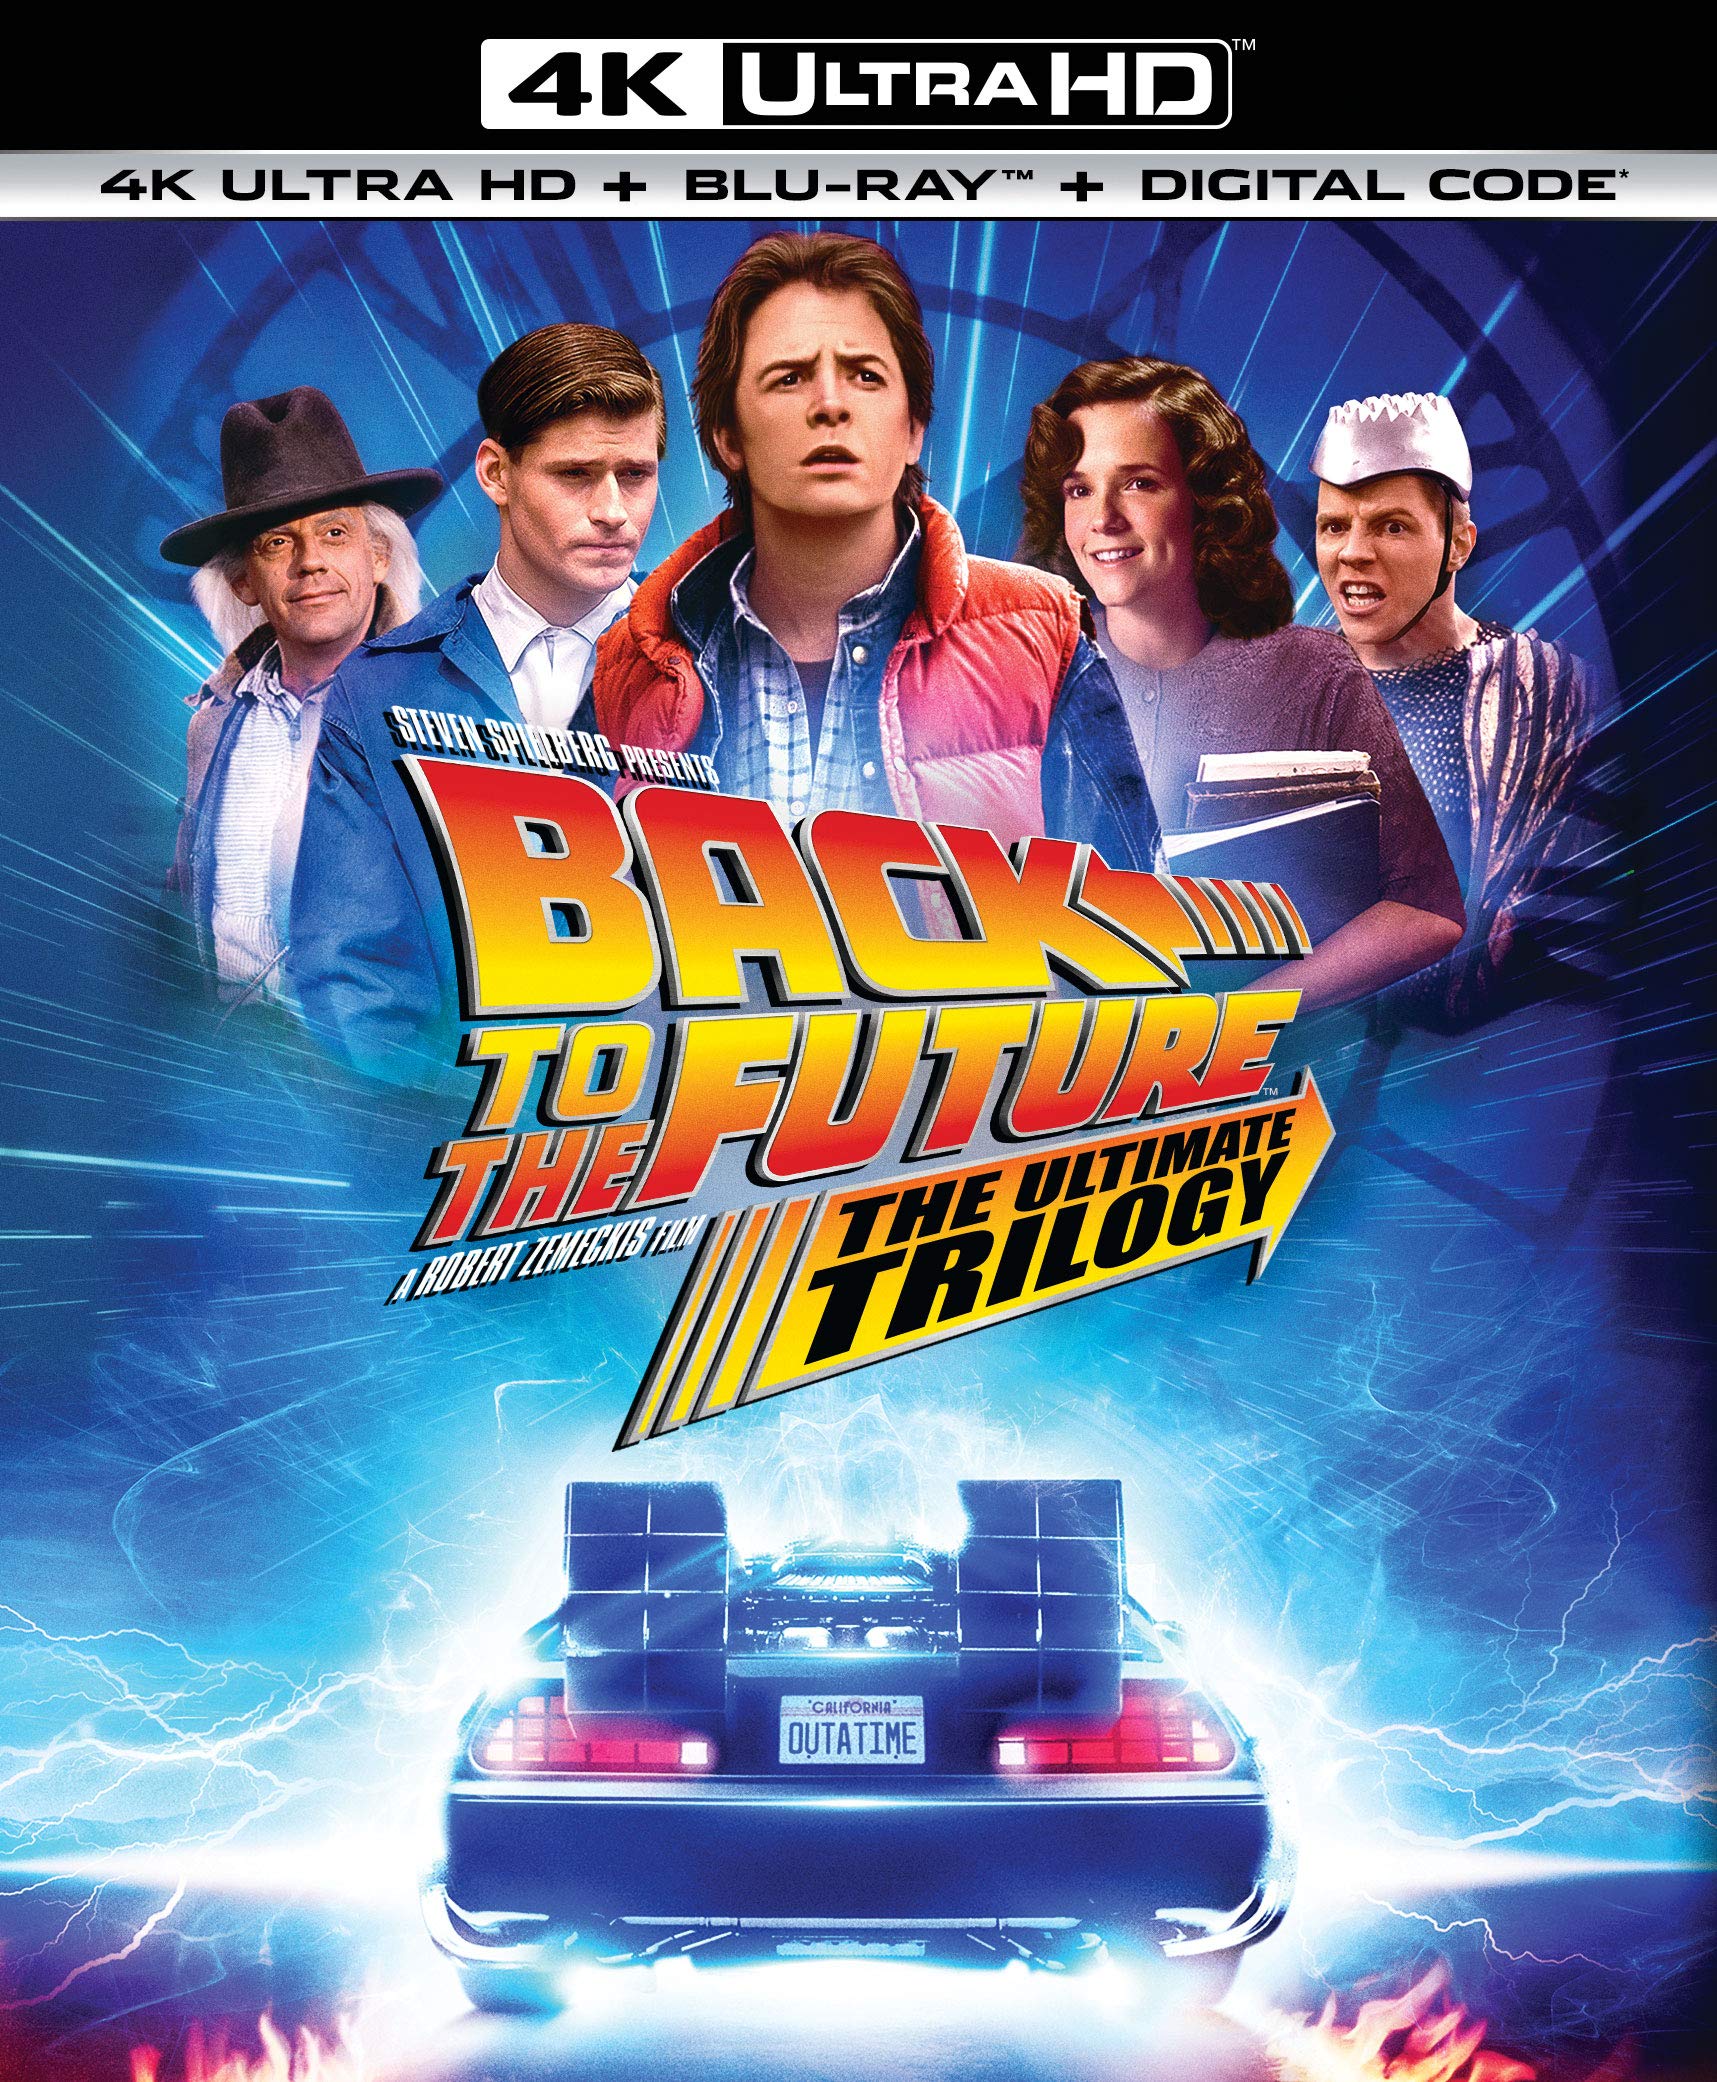 Back to the Future: The Ultimate Trilogy 4K Ultra HD